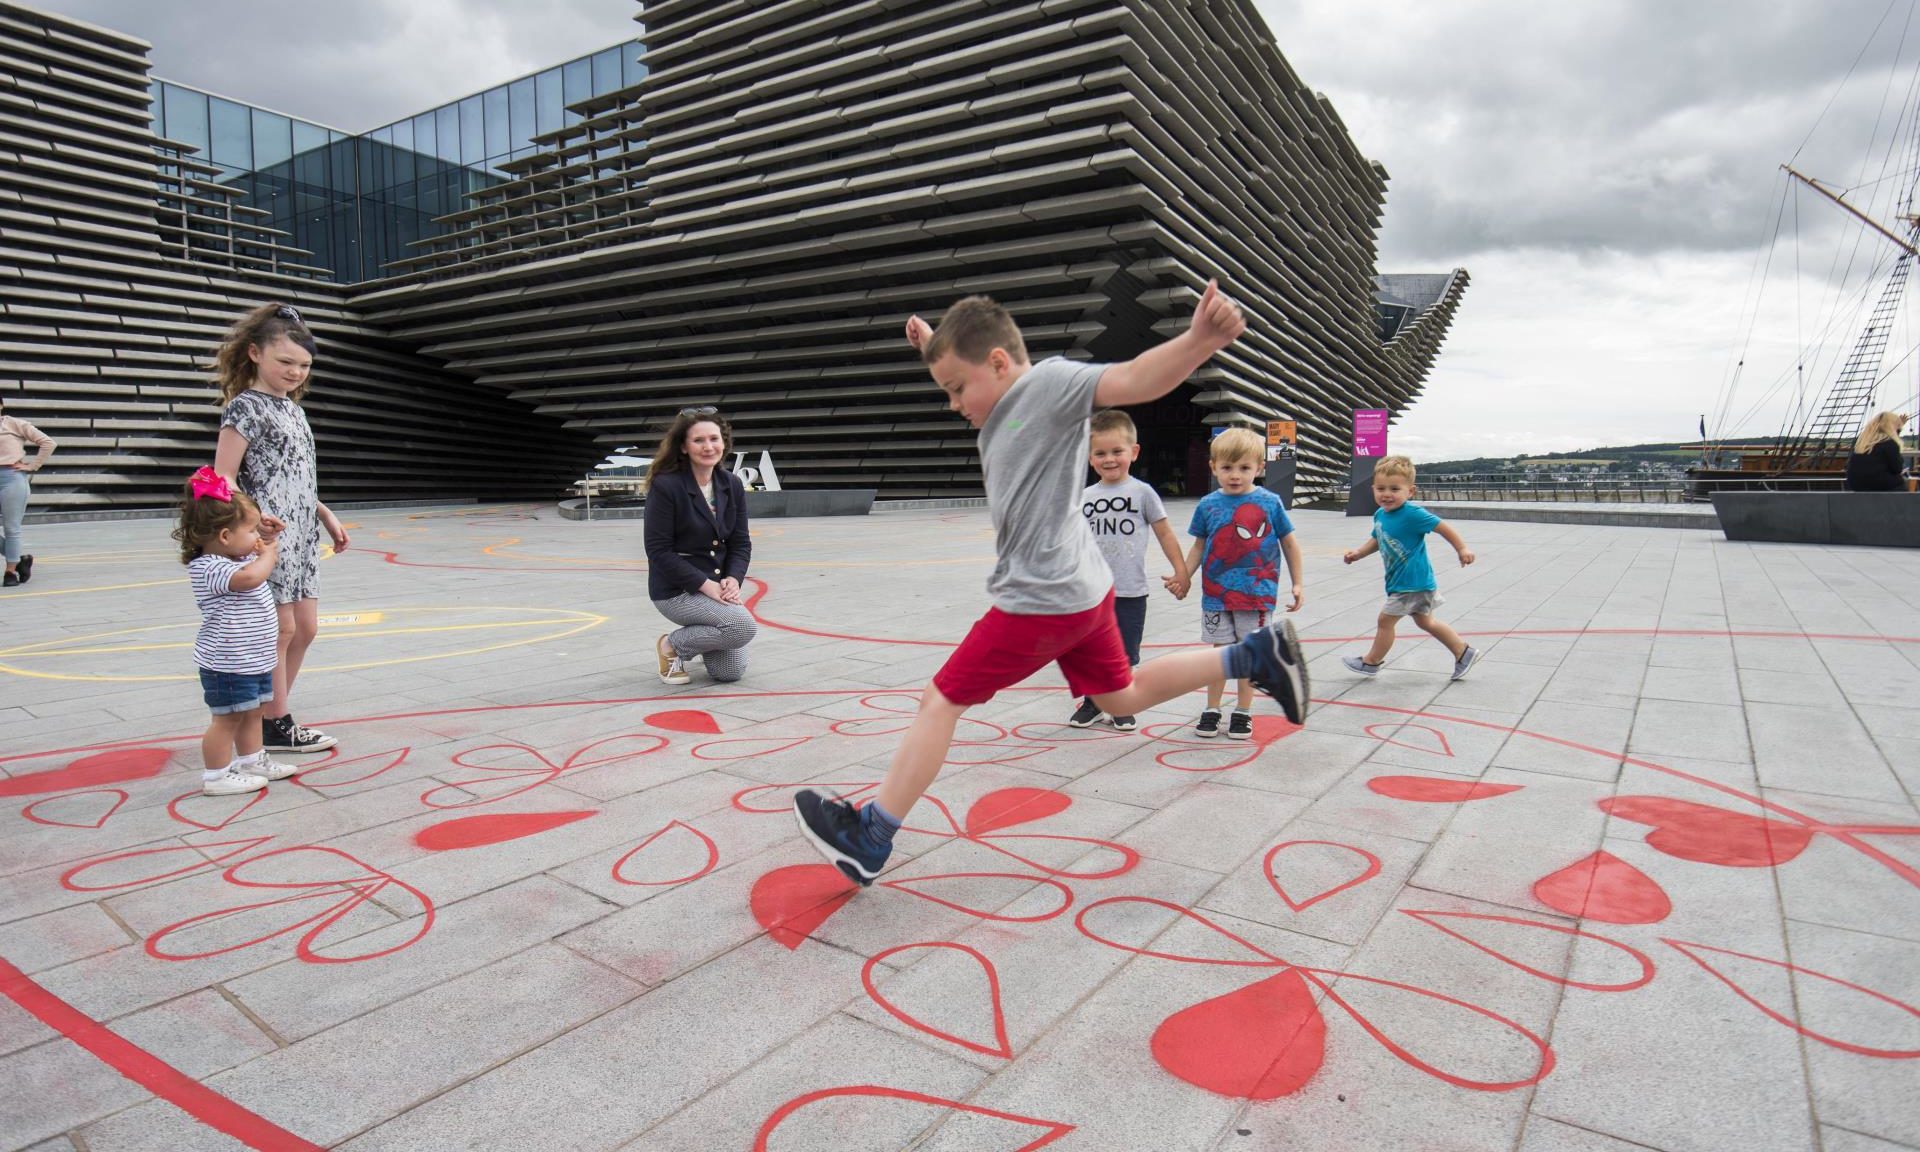 Jack Coulthard, 8, plays on the new interactive playground with Kirsty Hassard, curator at V&A Dundee.